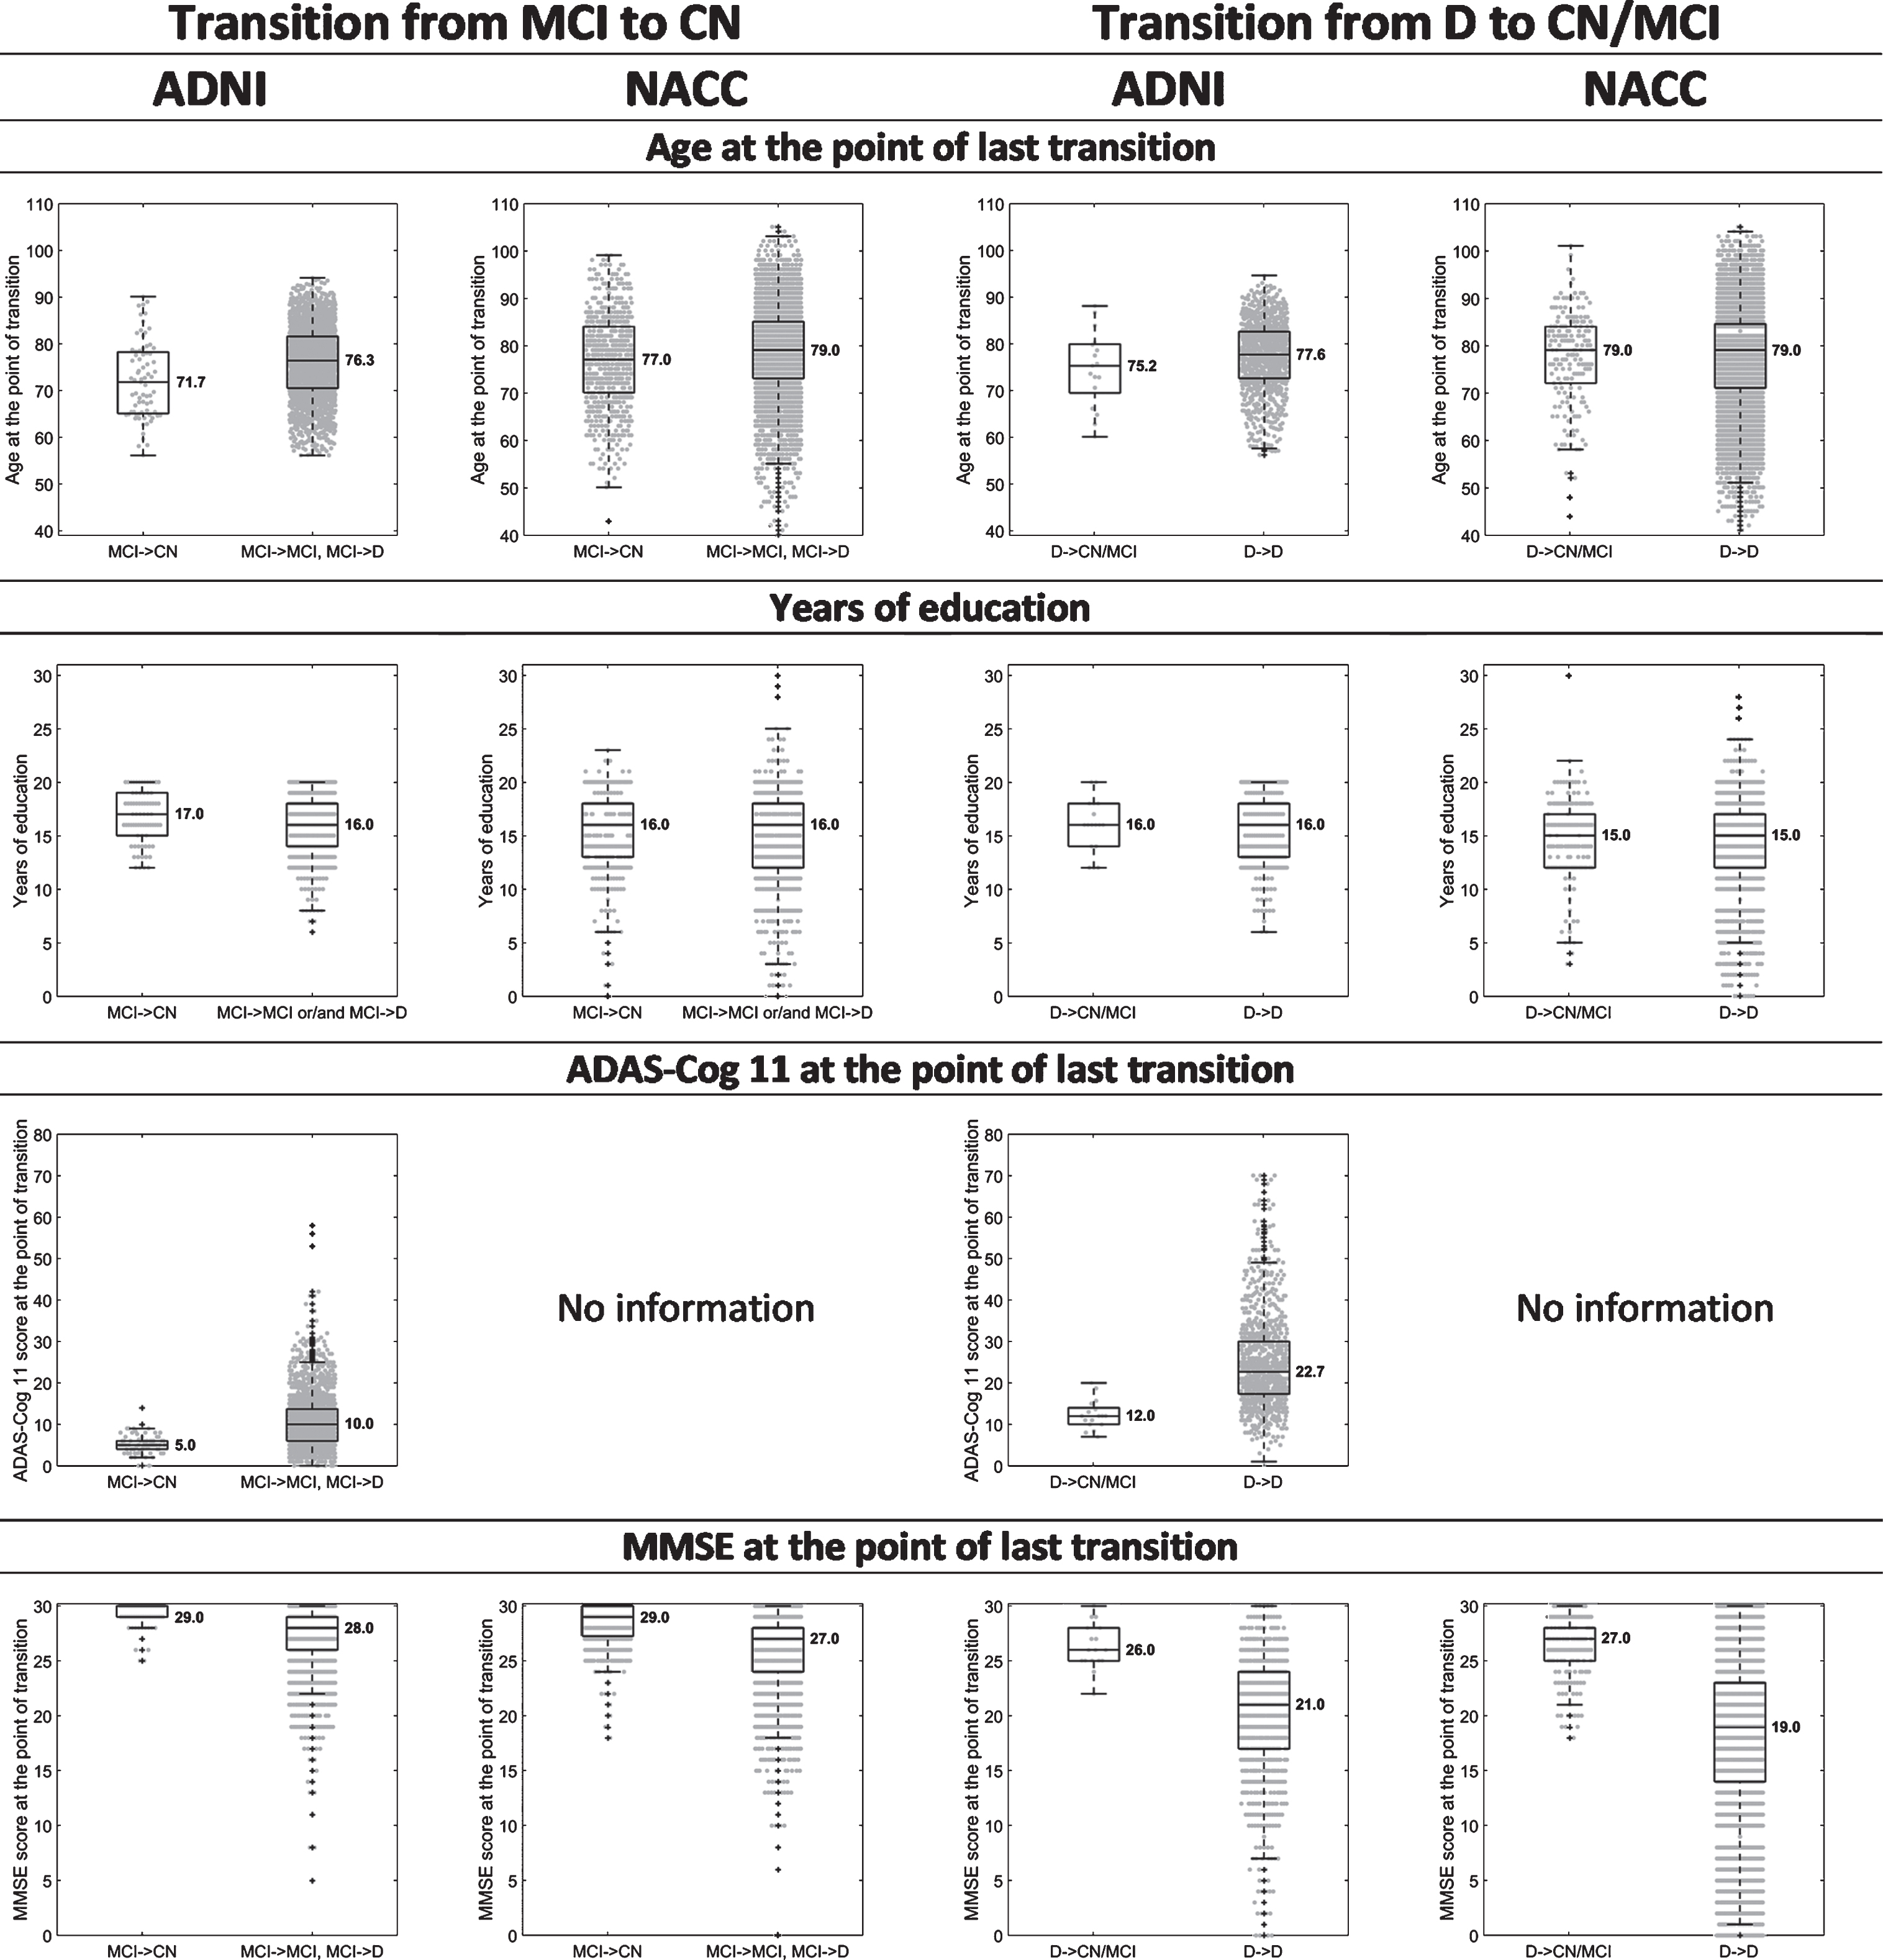 Box-and-whisker plots indicating differences in the median and variability of age, years of education, ADAS-Cog 11 and MMSE scores, between 1) those that transitioned from MCI to CN (MCI→CN) and those that transitioned from MCI to D (MCI→D) or remained at MCI (MCI→MCI), 'when assessed one year after the MCI diagnosis; and 2) those that transitioned from D to CN or MCI (D→CN/MCI) and those that remained at D (D→D), when assessed one year after the D diagnosis. The values presented are at the point of last diagnosis, i.e., at the point of the CN, last MCI, and D diagnoses for the MCI→CN, MCI→MCI, and MCI→D transitions, respectively, and at the point of the CN, MCI, and last D diagnoses for the D→CN, D→MCI, and D→D transitions, respectively. For the years of education, we compared those individuals that transitioned backwards at least once during the course of the study against those that remained at the same state or moved forward (and never backwards), so that to avoid taking into account multiple times the education of a single individual.